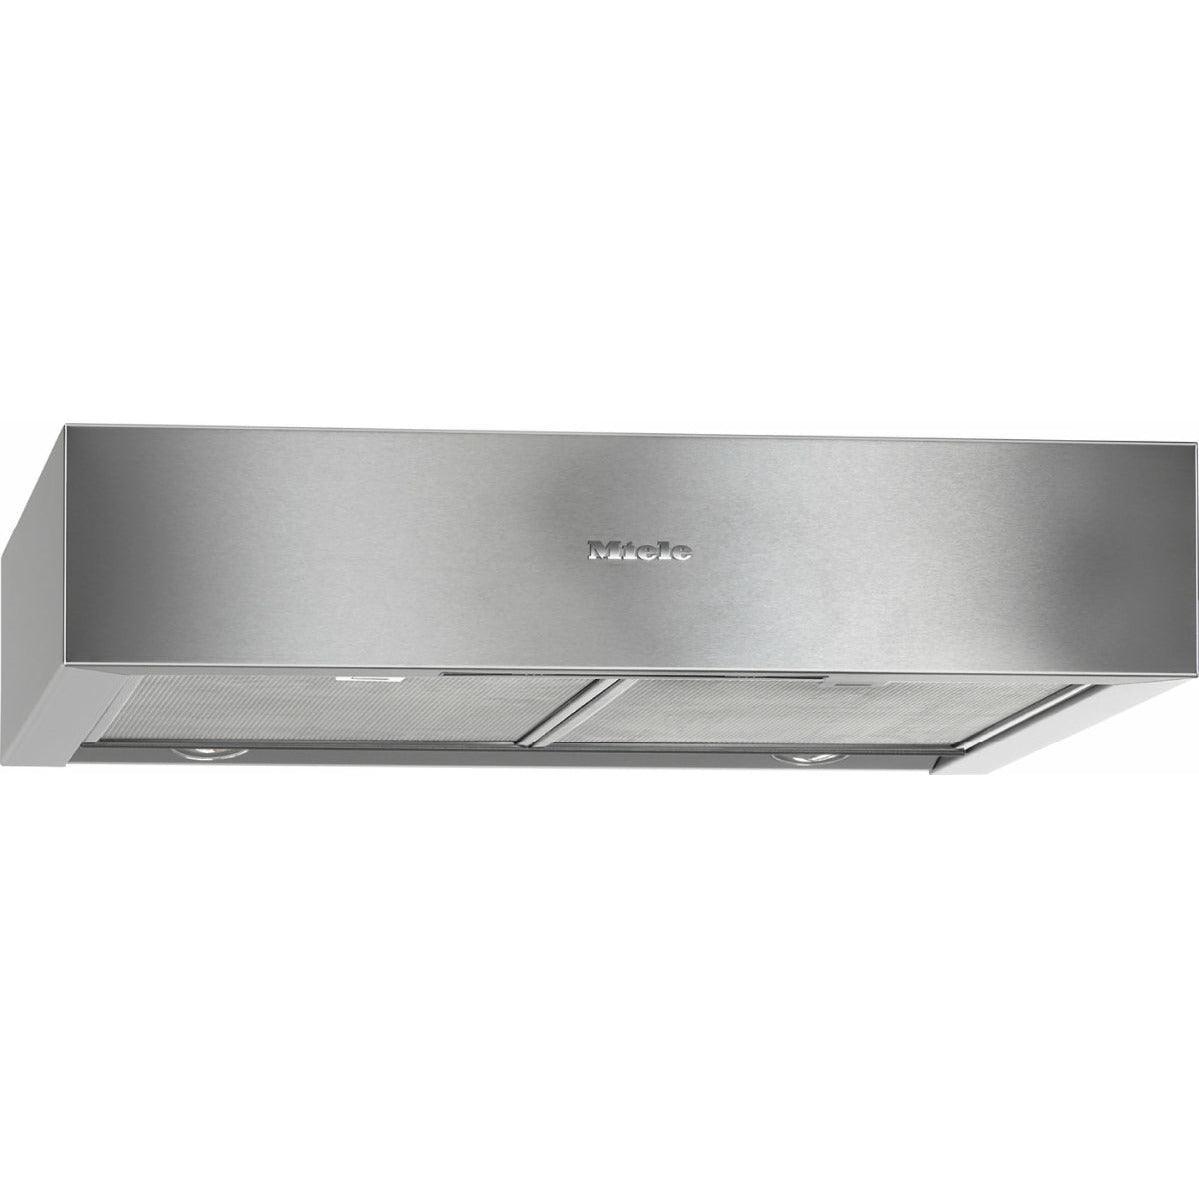 Miele 59.8cm Built-In Canopy Cooker Hood - Stainless Steel | DA1260 (7480380915900)